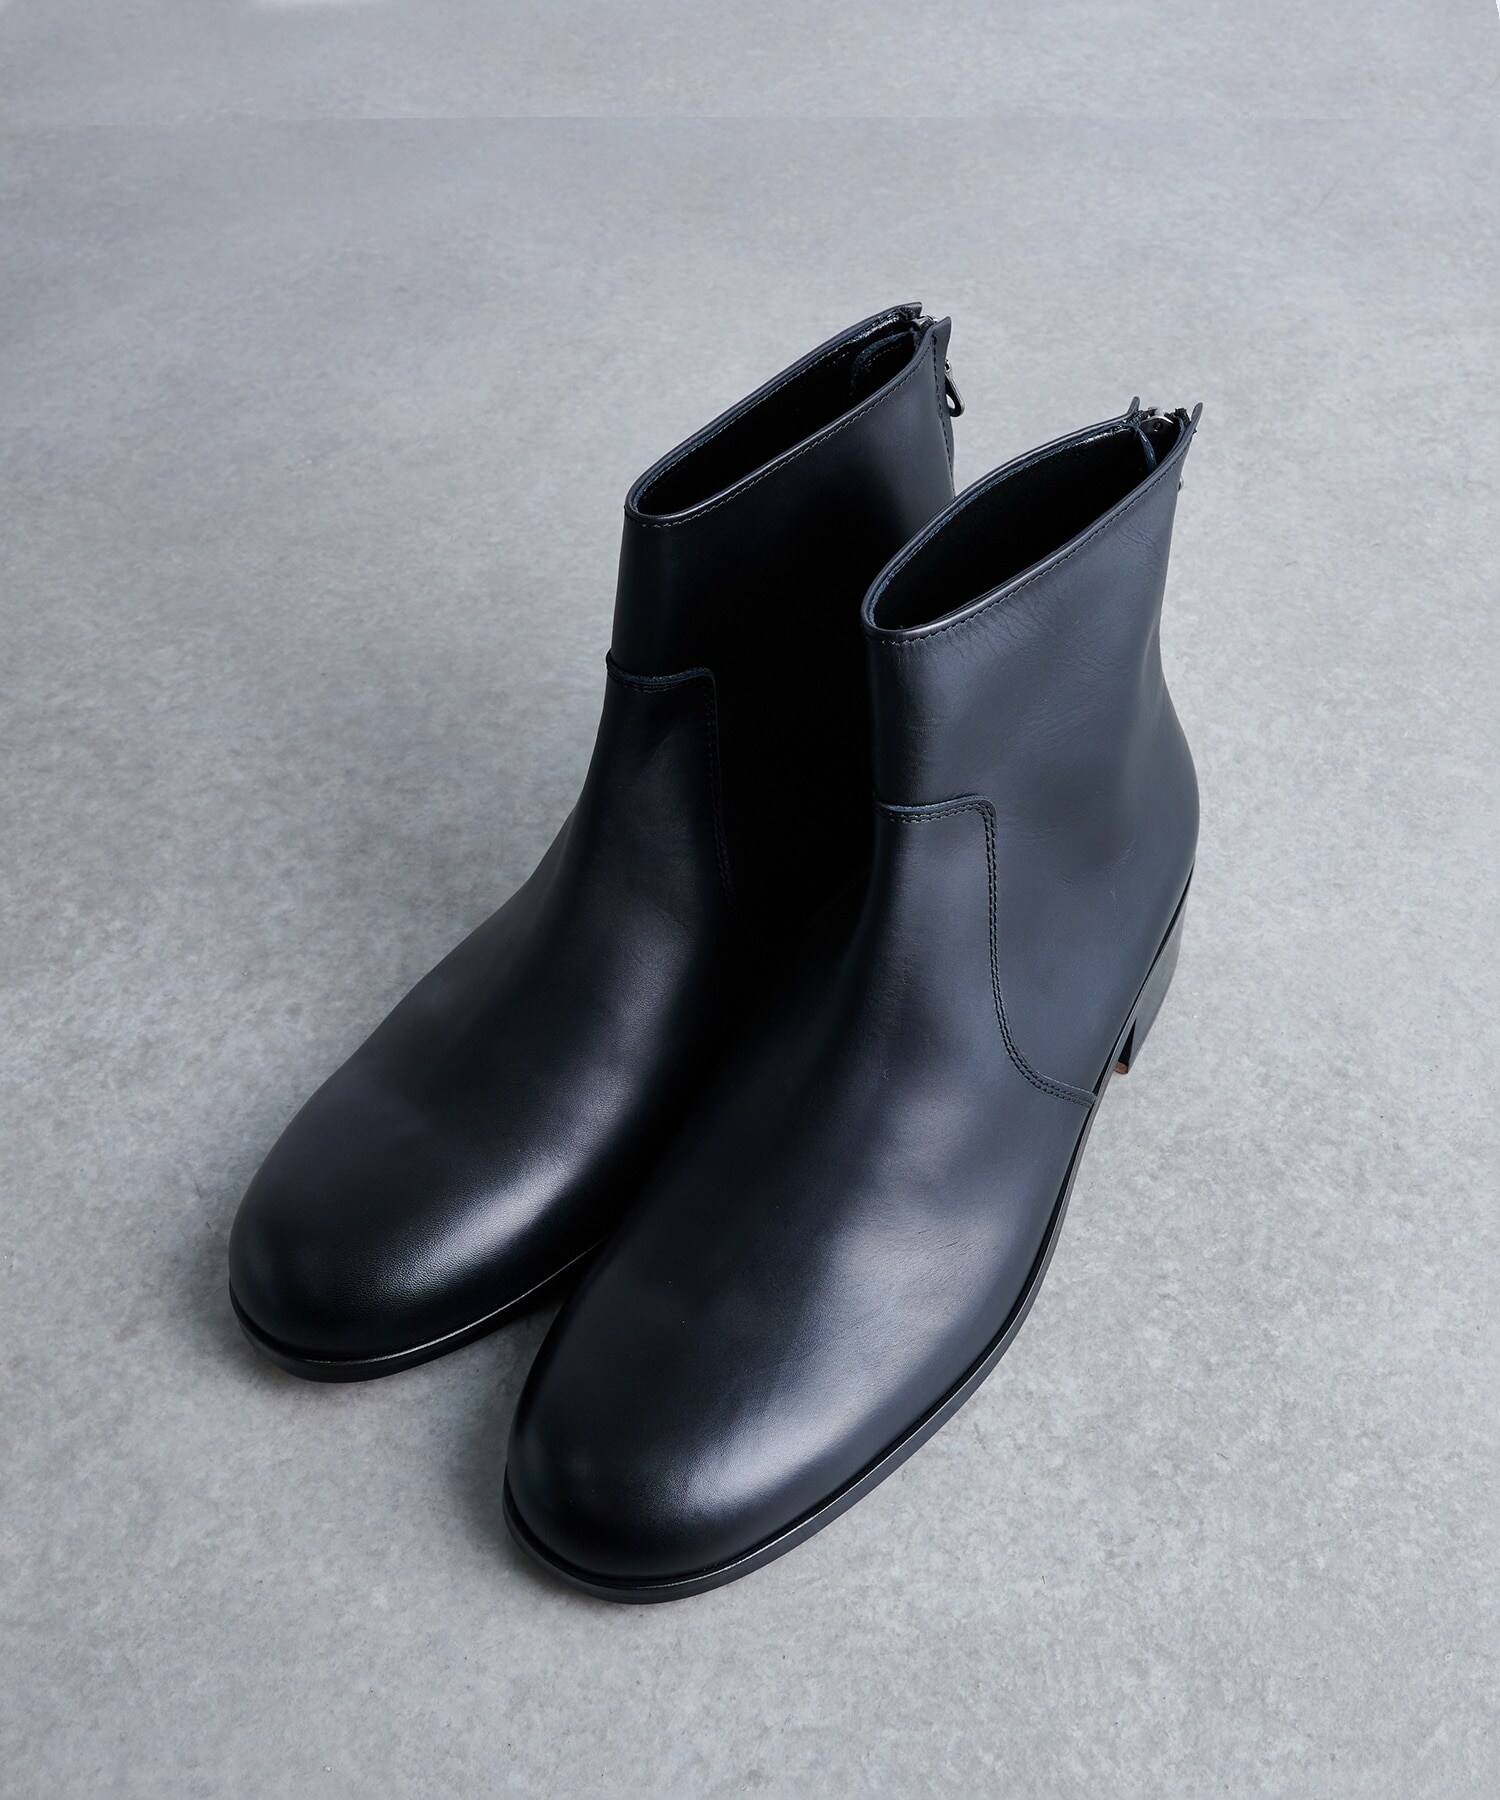 BL BACKZIP BOOTS PADRONE